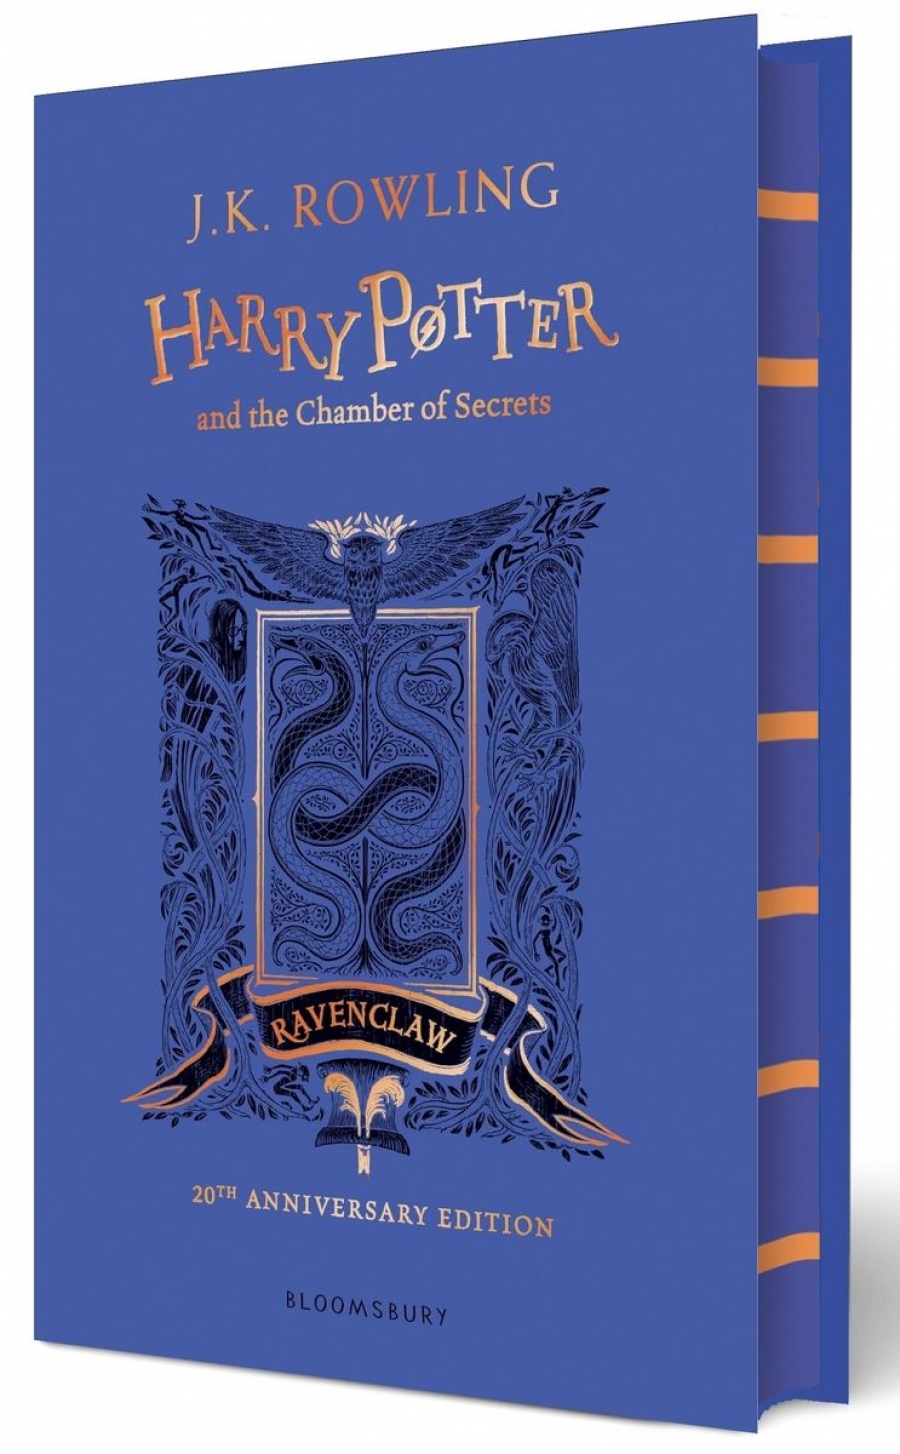 Rowling J.K. Harry Potter and the Chamber of Secrets  Ravenclaw Ed HB 